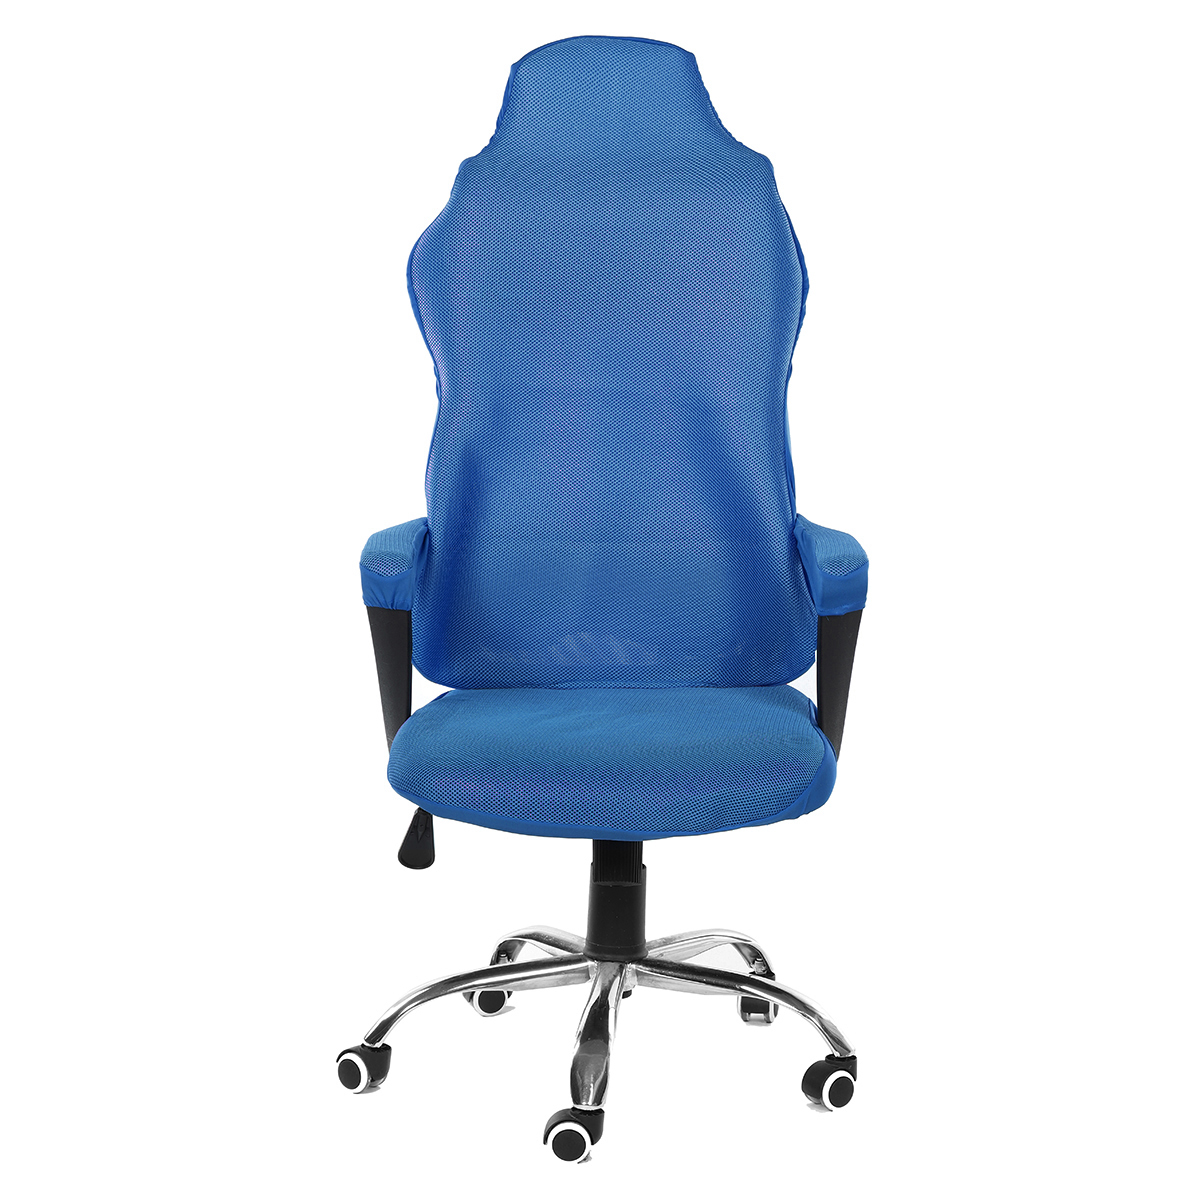 Mesh-Gaming-Chair-Elastic-Chair-Cover-Office-Chair-Dustproof-Chair-Cover-Home-Office-Solid-Color-Cha-1827333-9